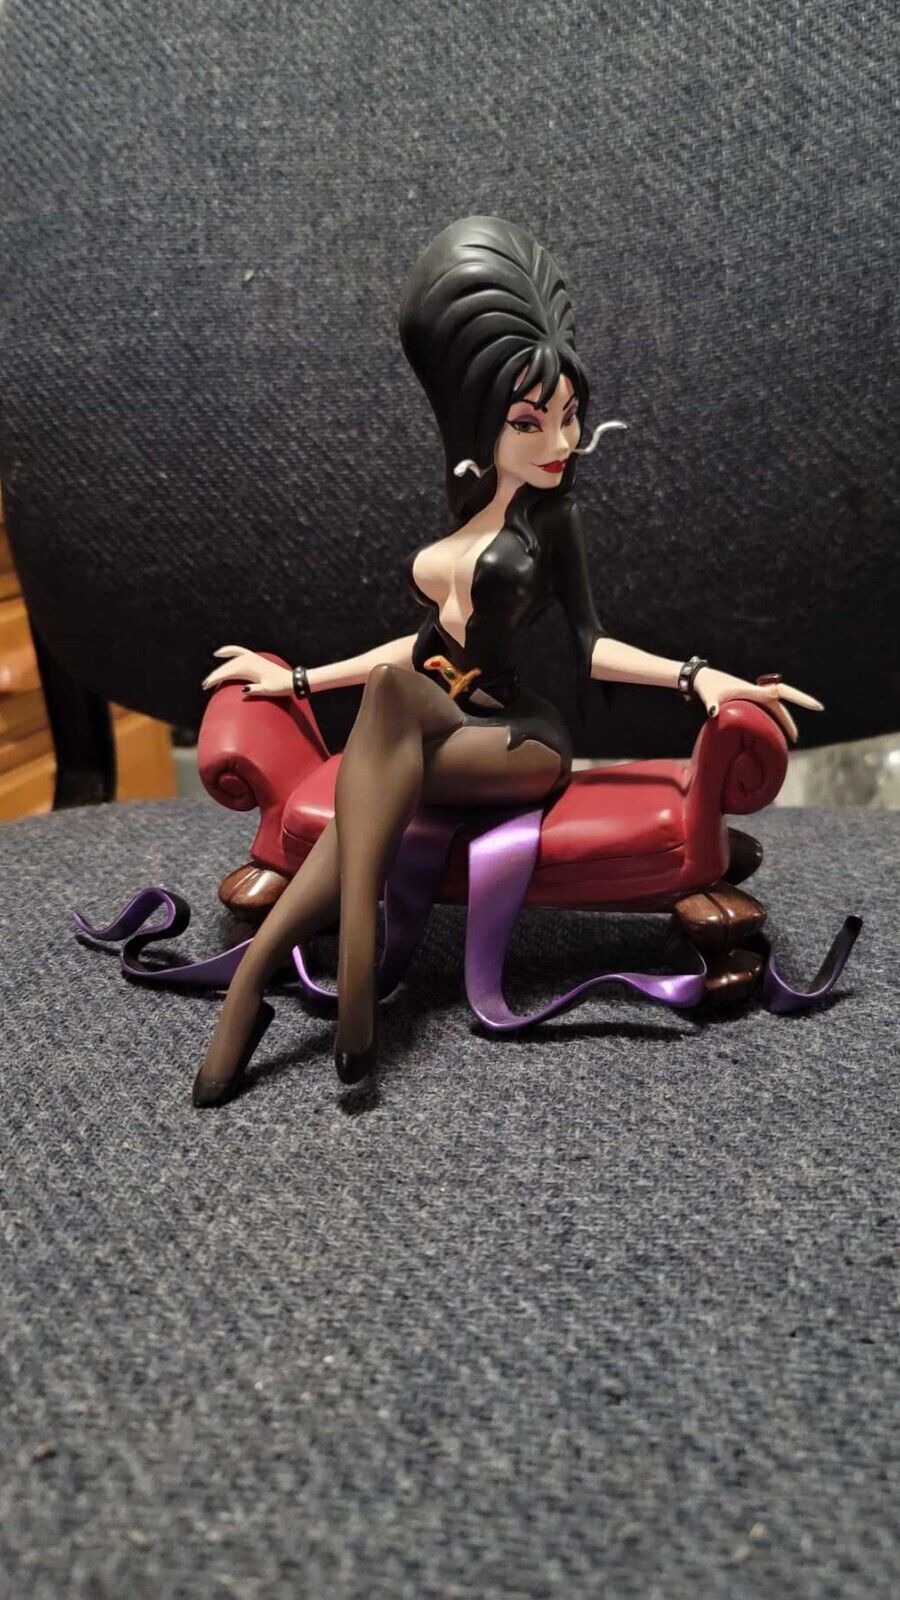 Sideshow Elvira On Couch \